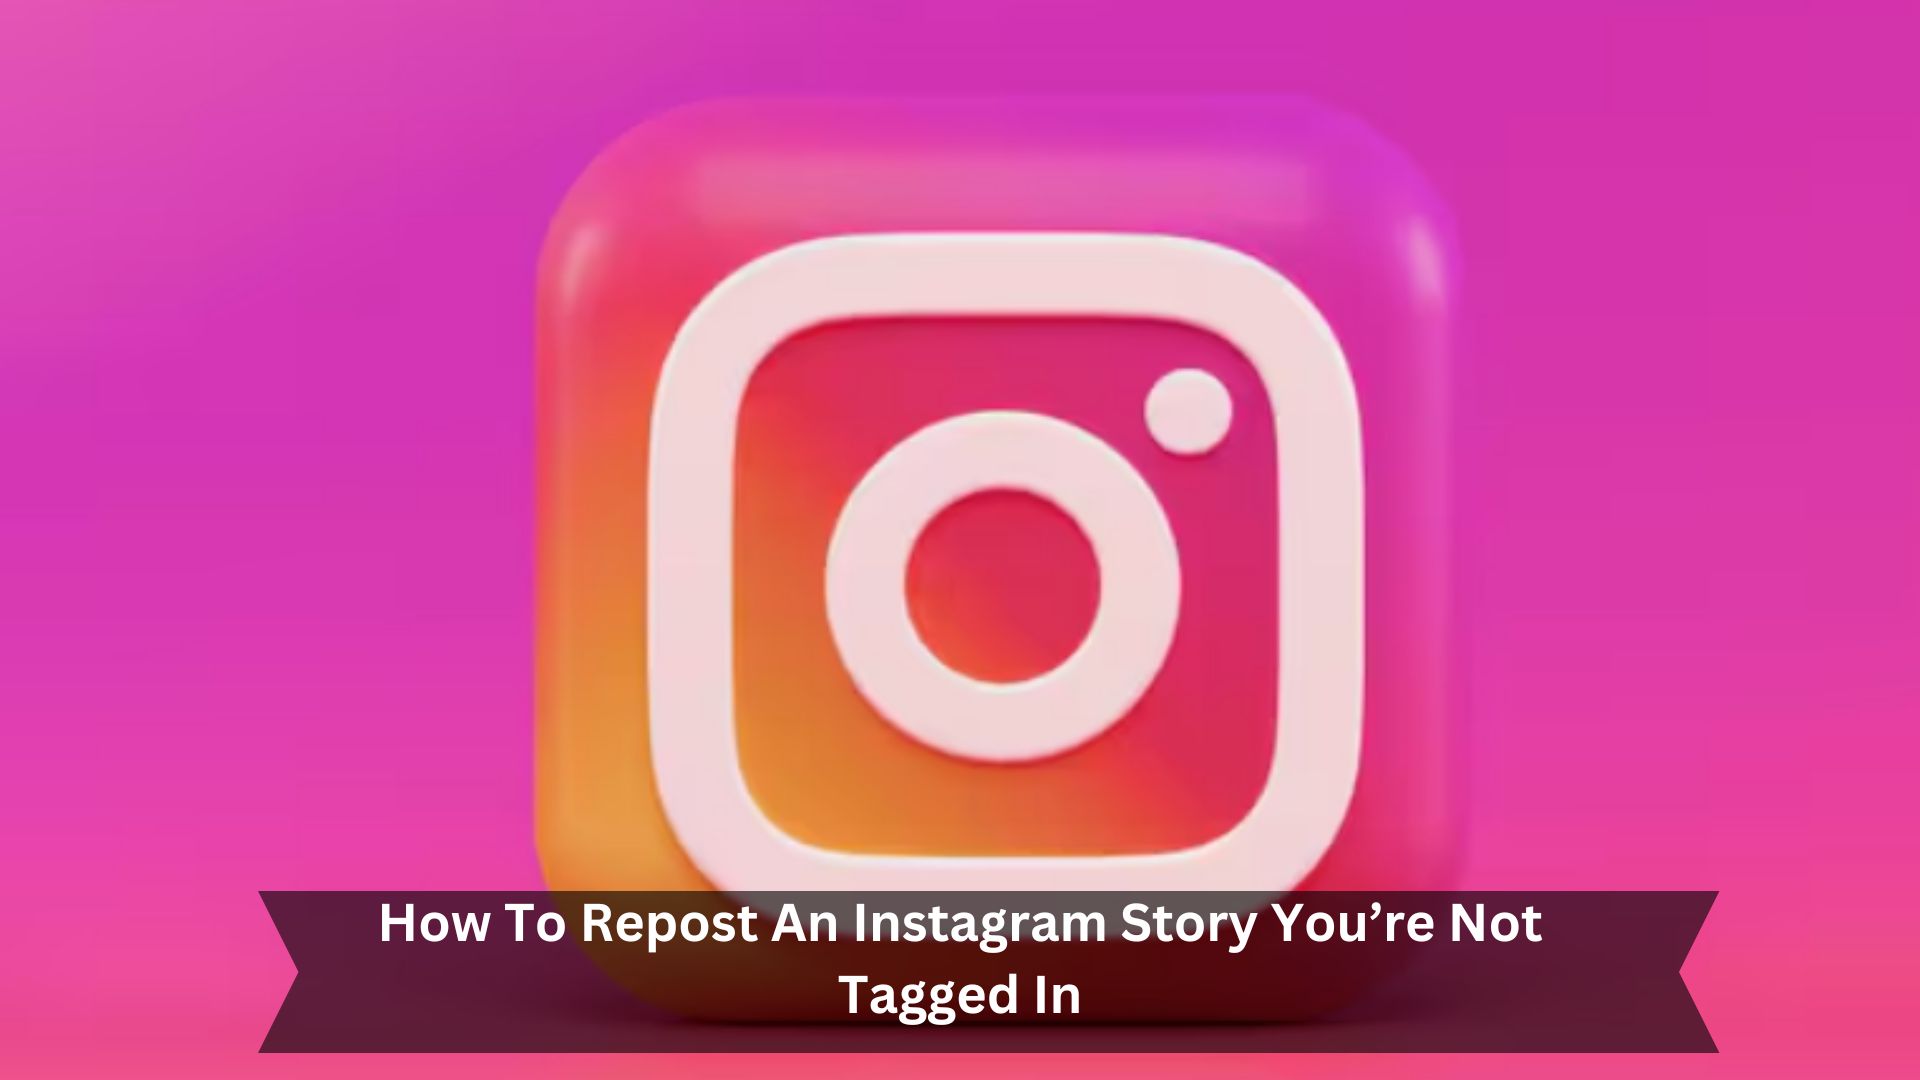 How-To-Repost-An-Instagram-Story-Youre-Not-Tagged-In